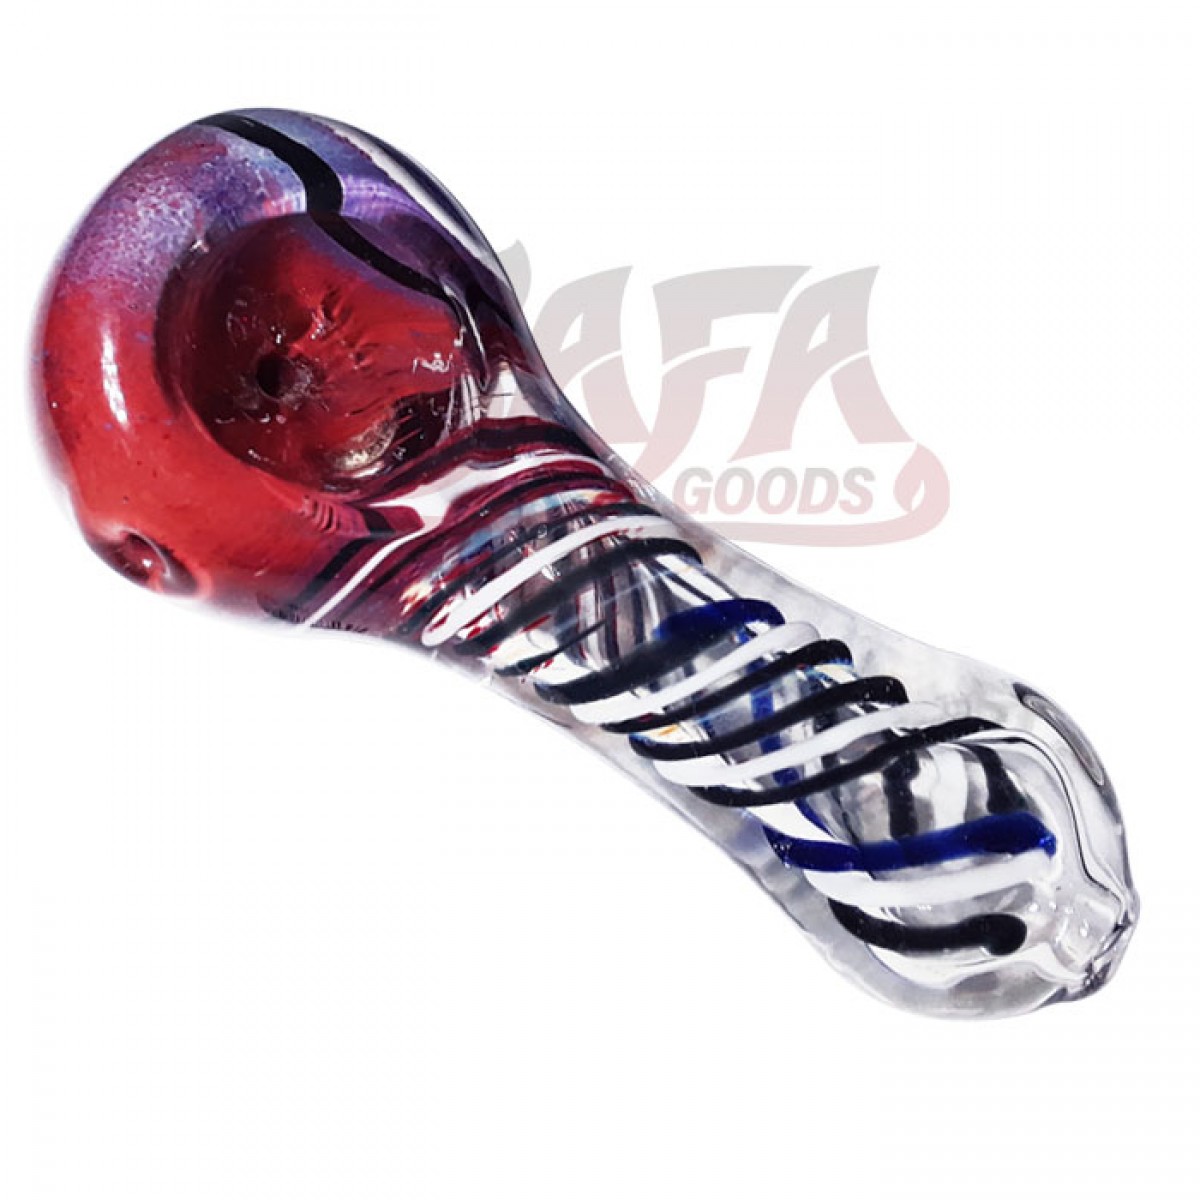 3 Inch 80g Glass Handpipes